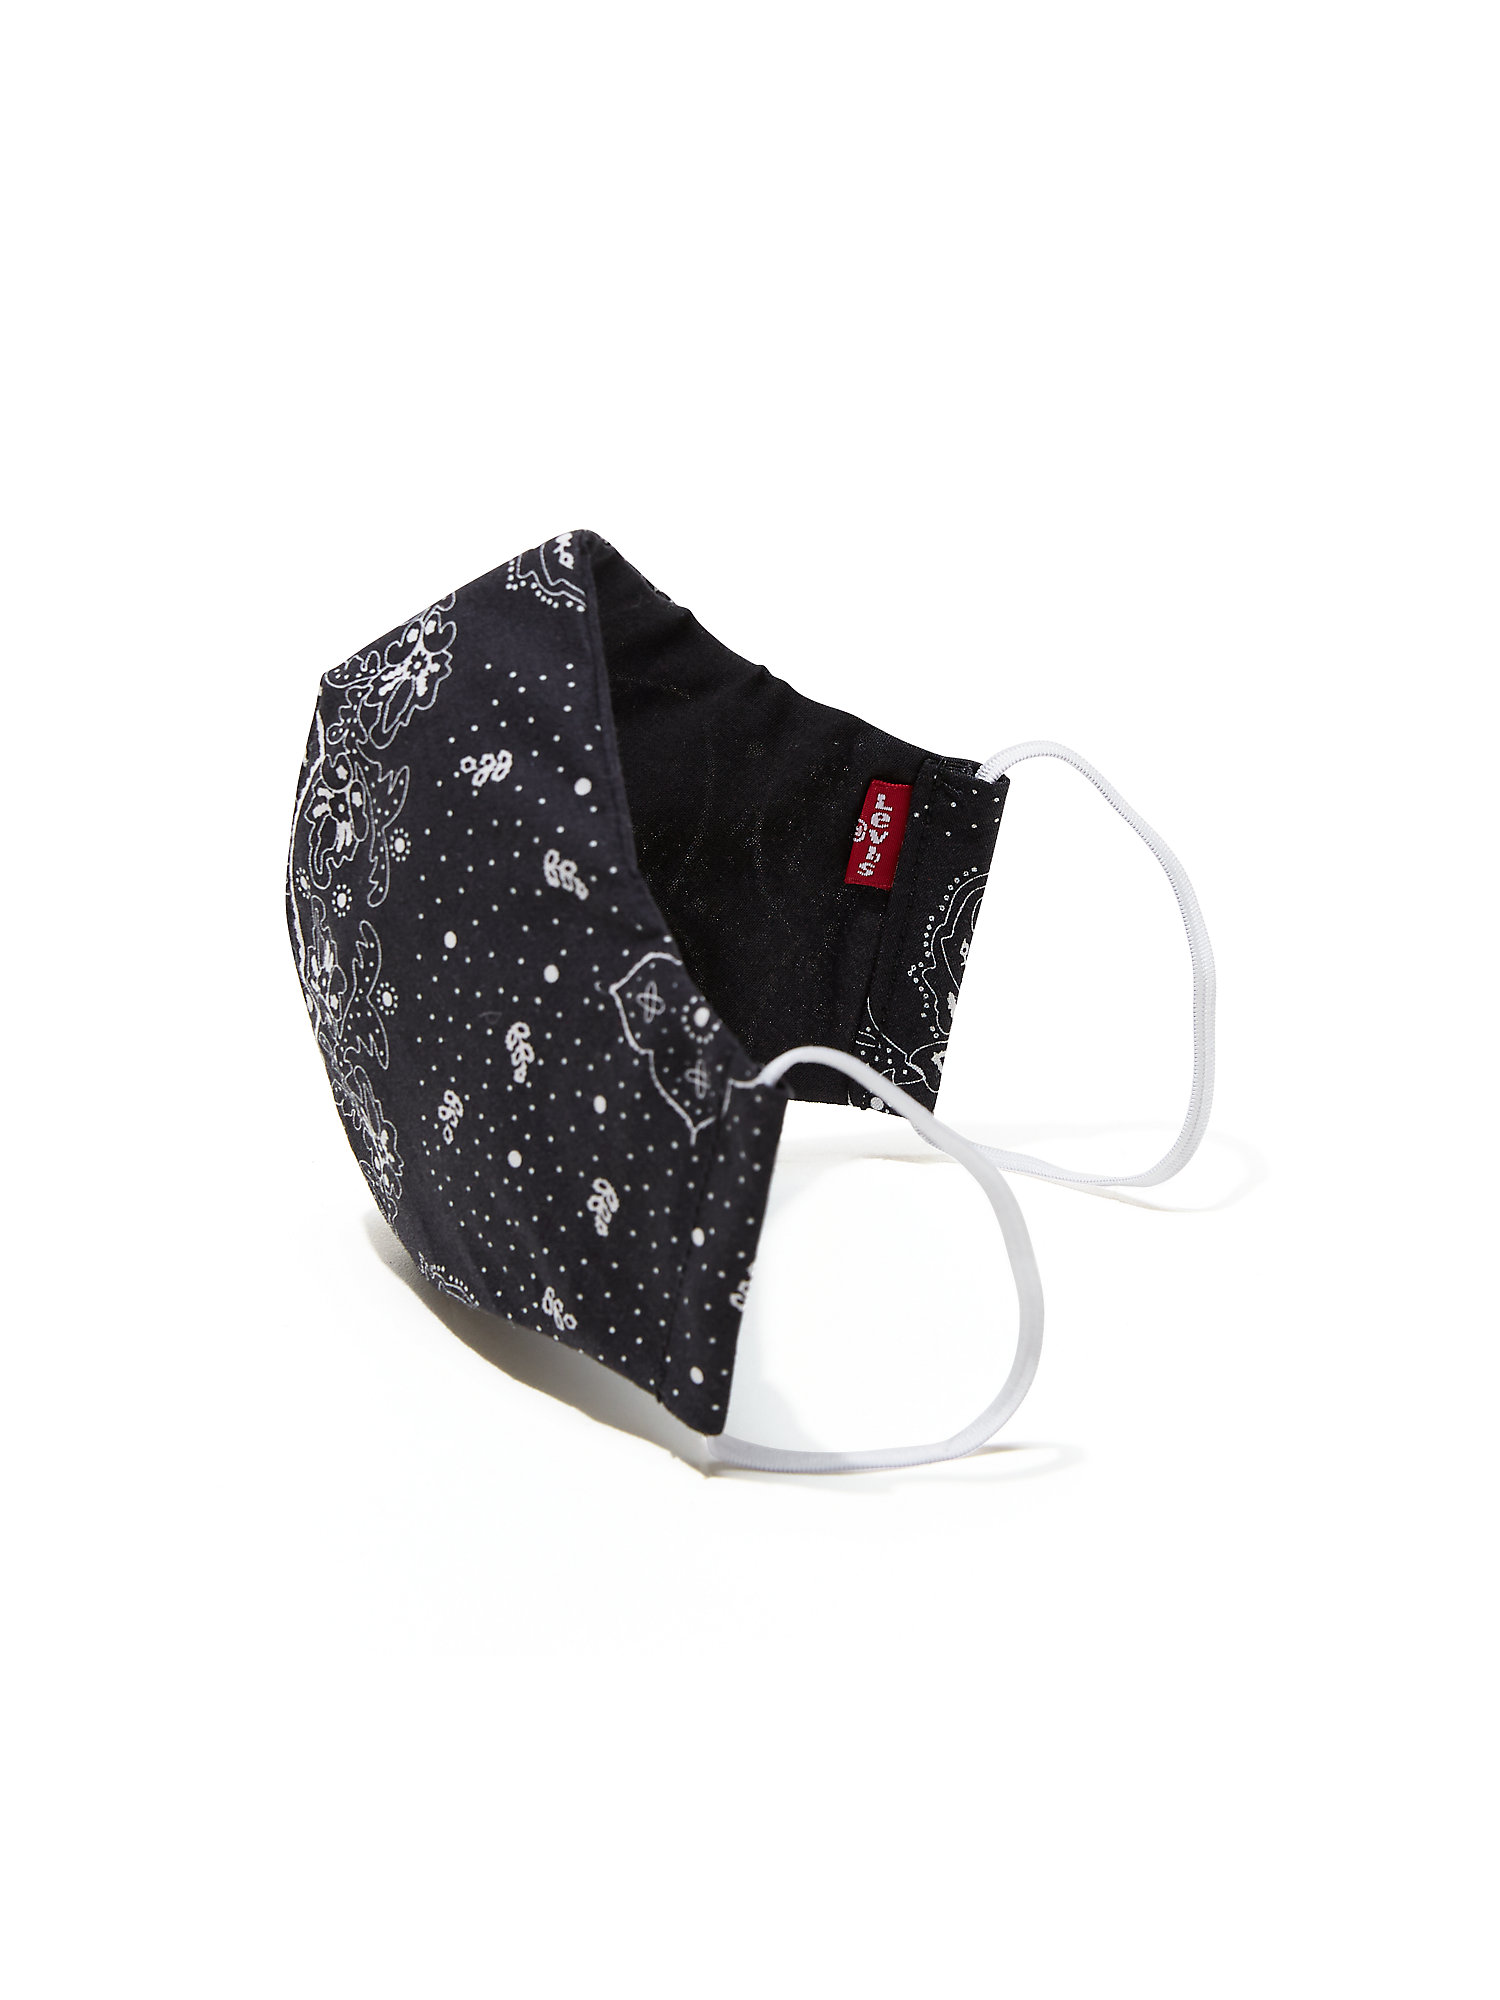 Levi's Reusable Print Face Mask (3 Pack) - image 2 of 4